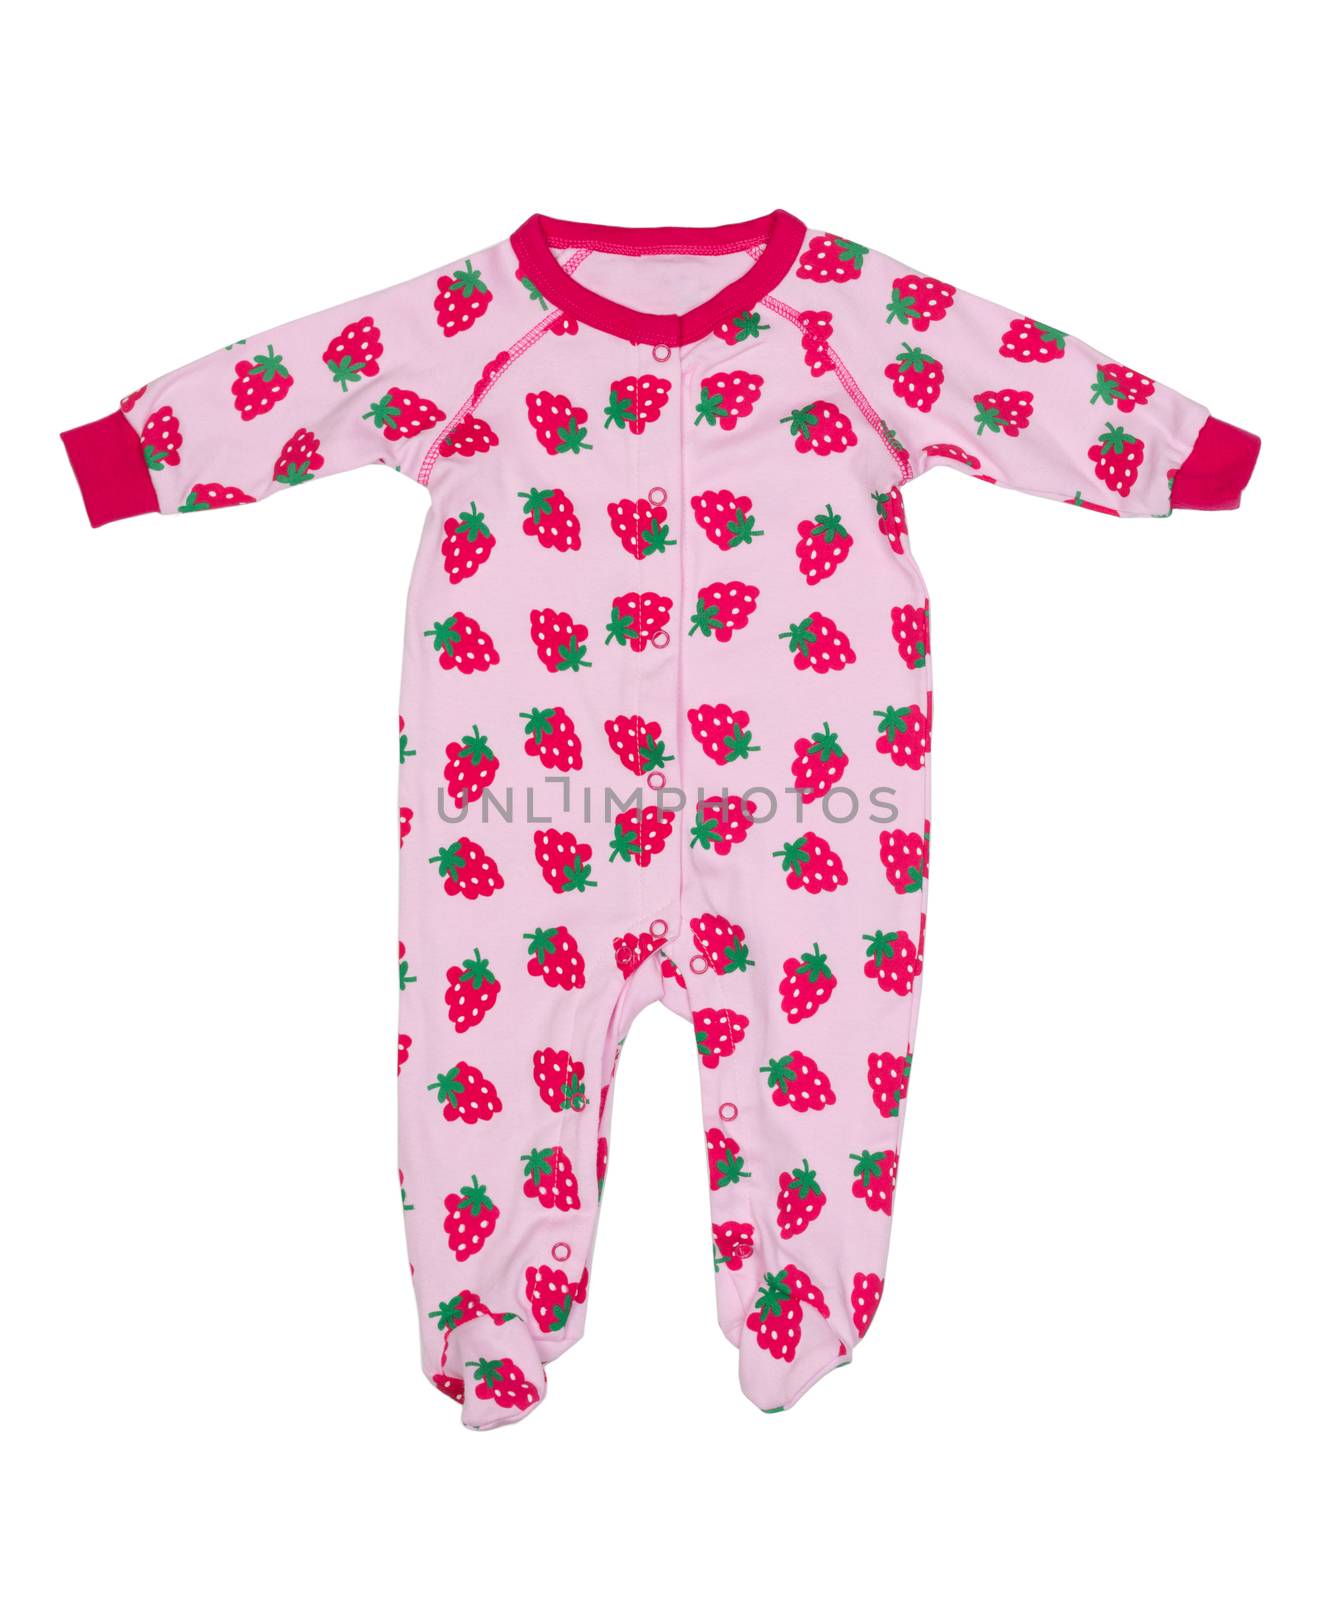 Clothing for newborns with strawberry pattern by RuslanOmega